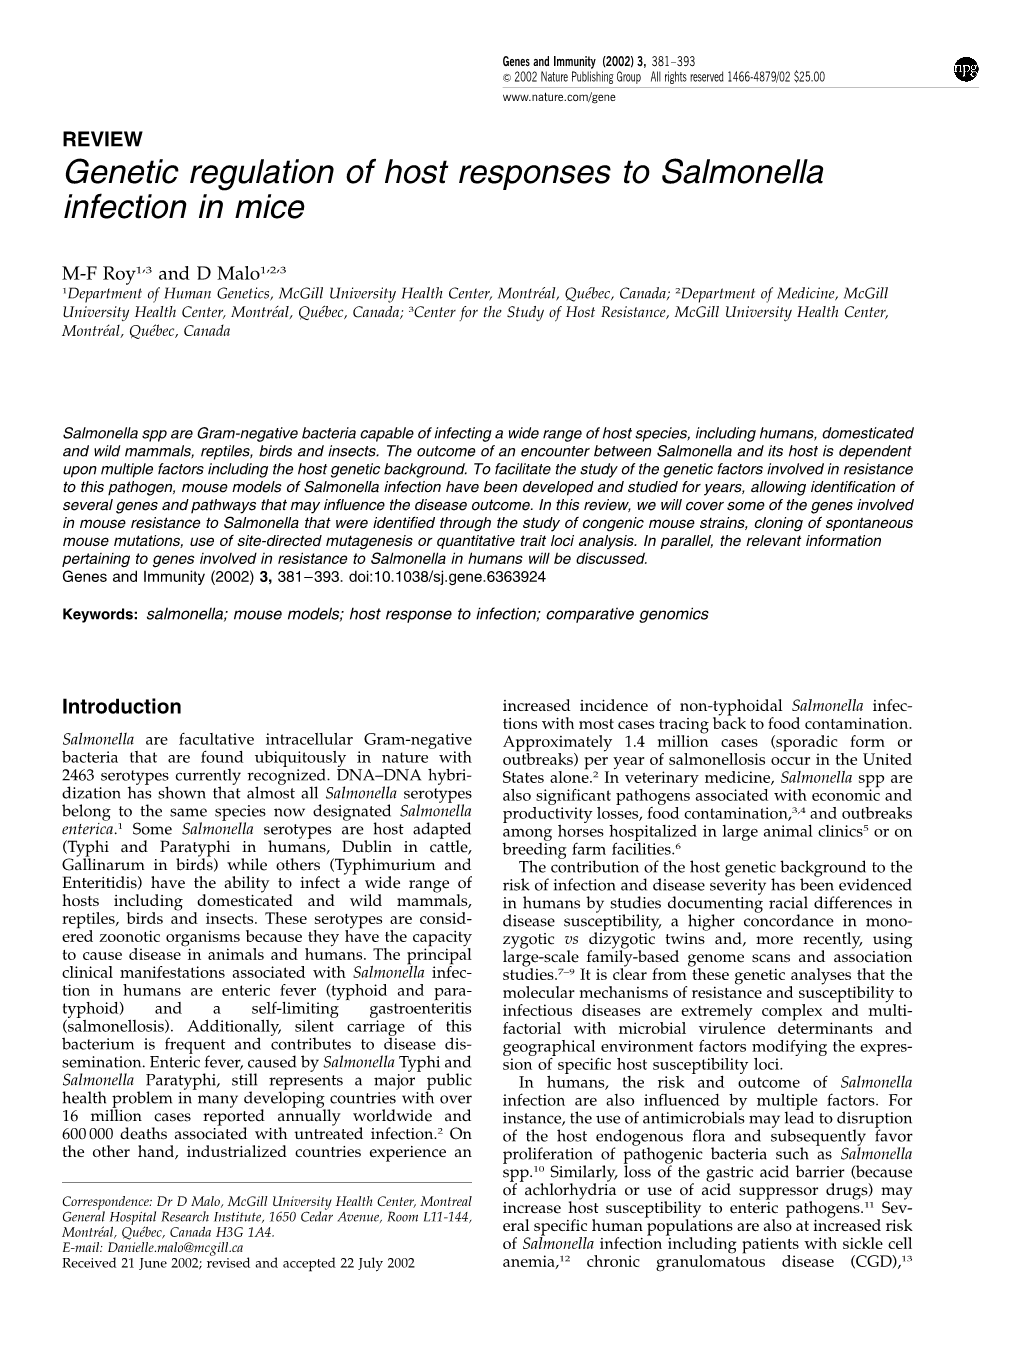 Genetic Regulation of Host Responses to Salmonella Infection in Mice